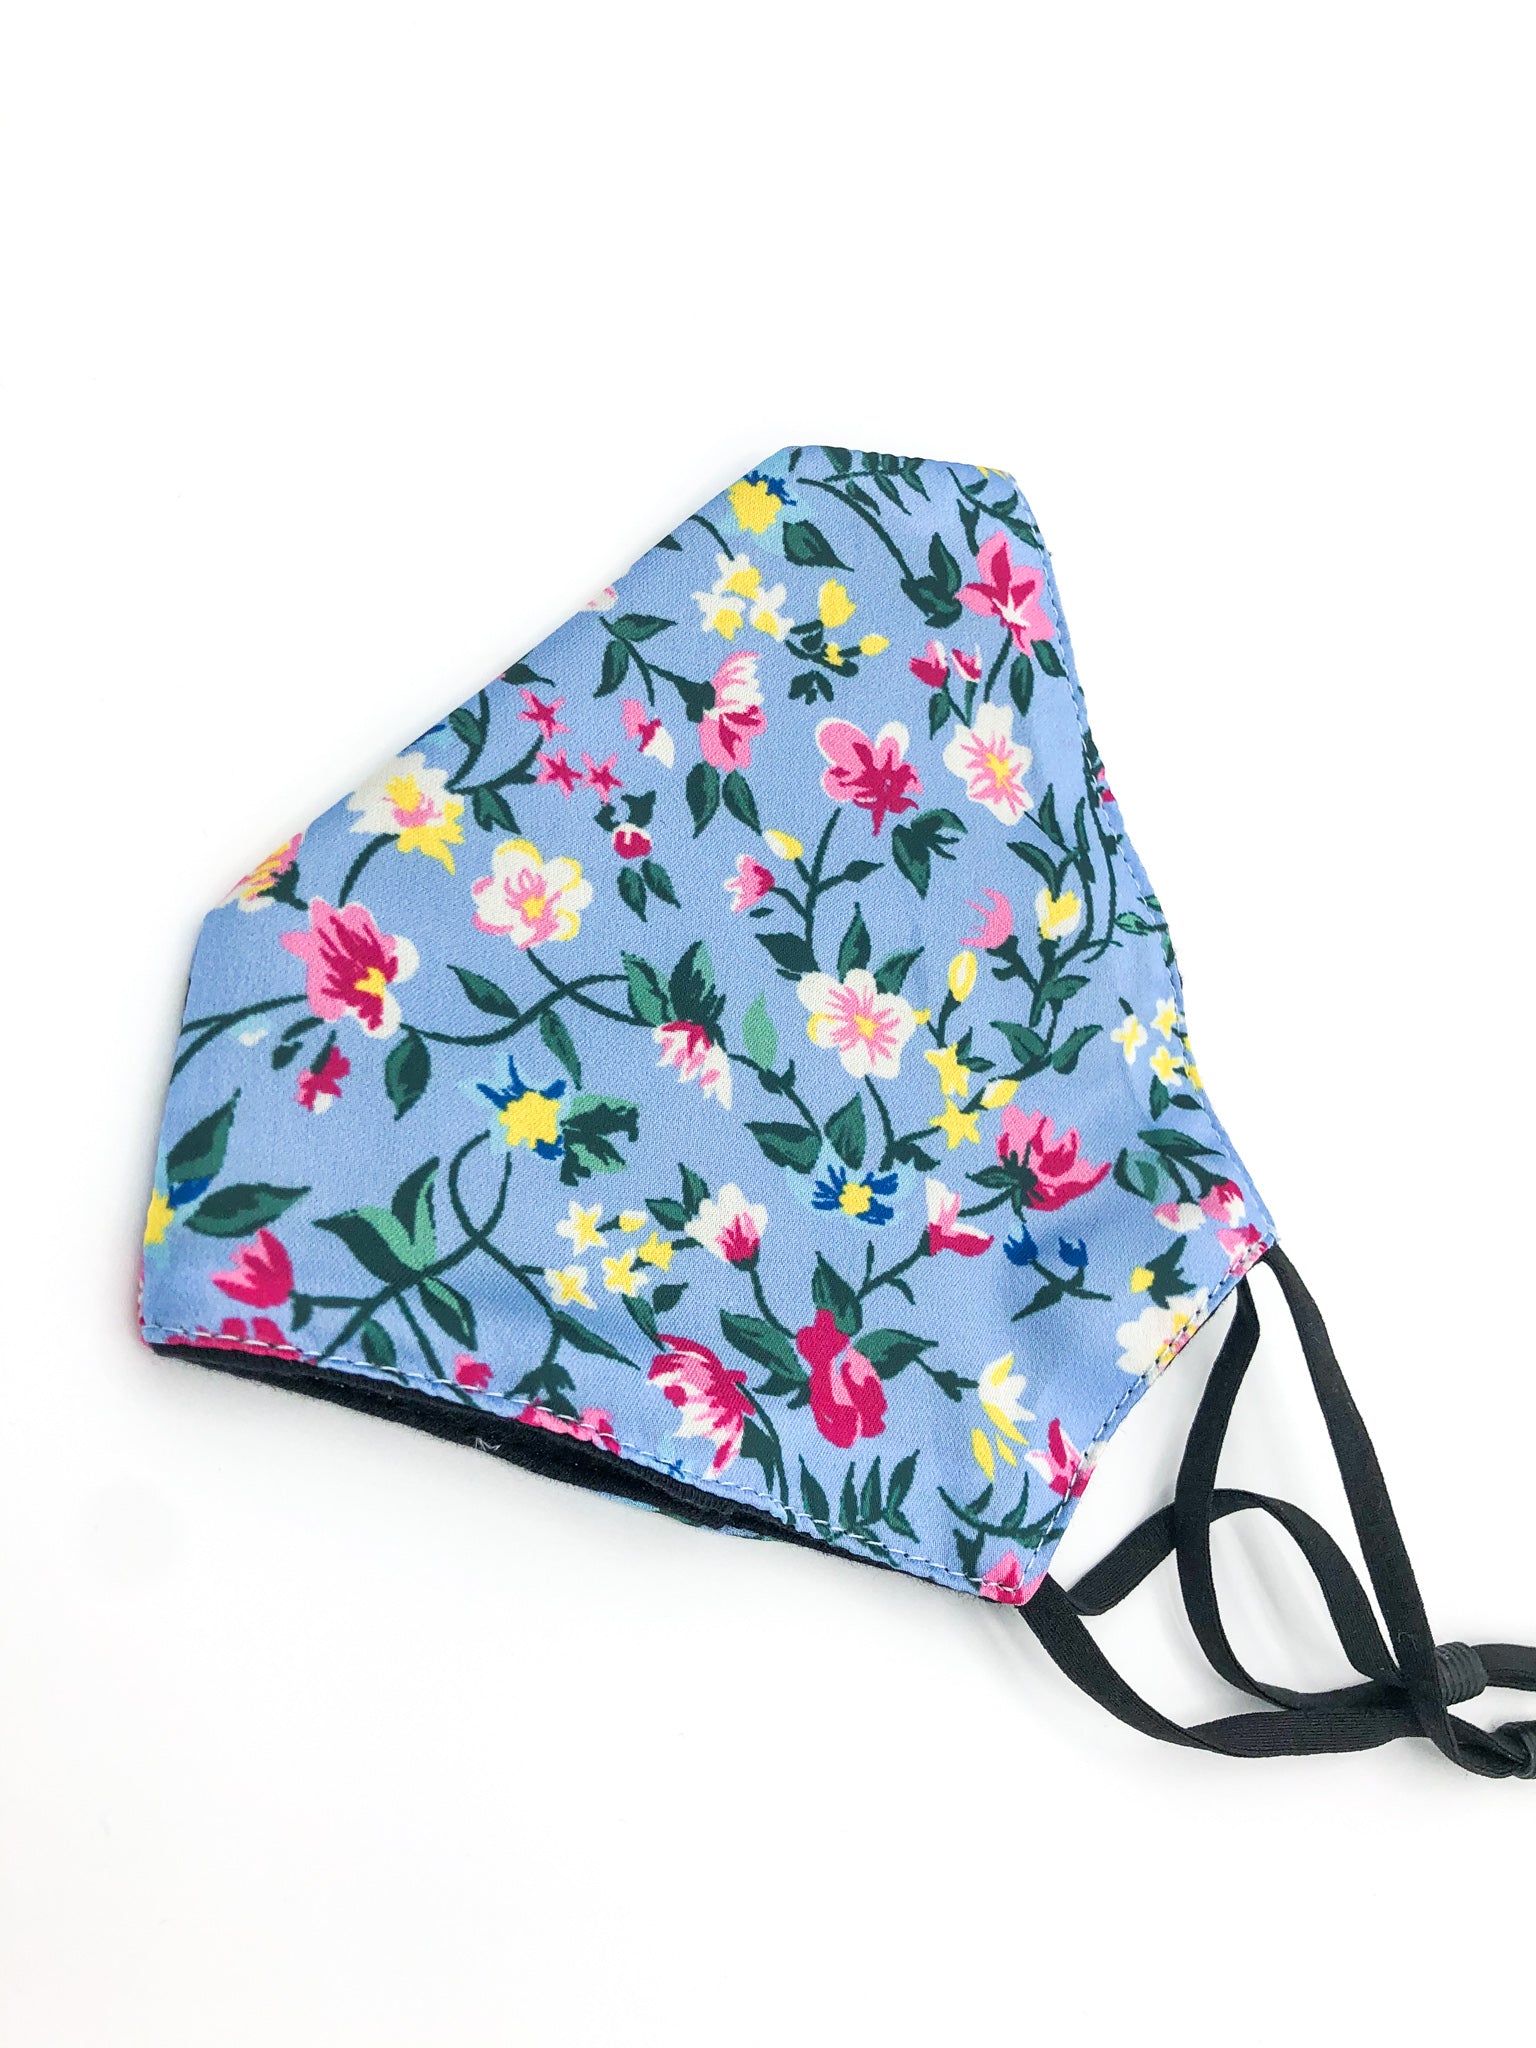 Blue floral face covering with adjustable straps, nose wire by Unified UK